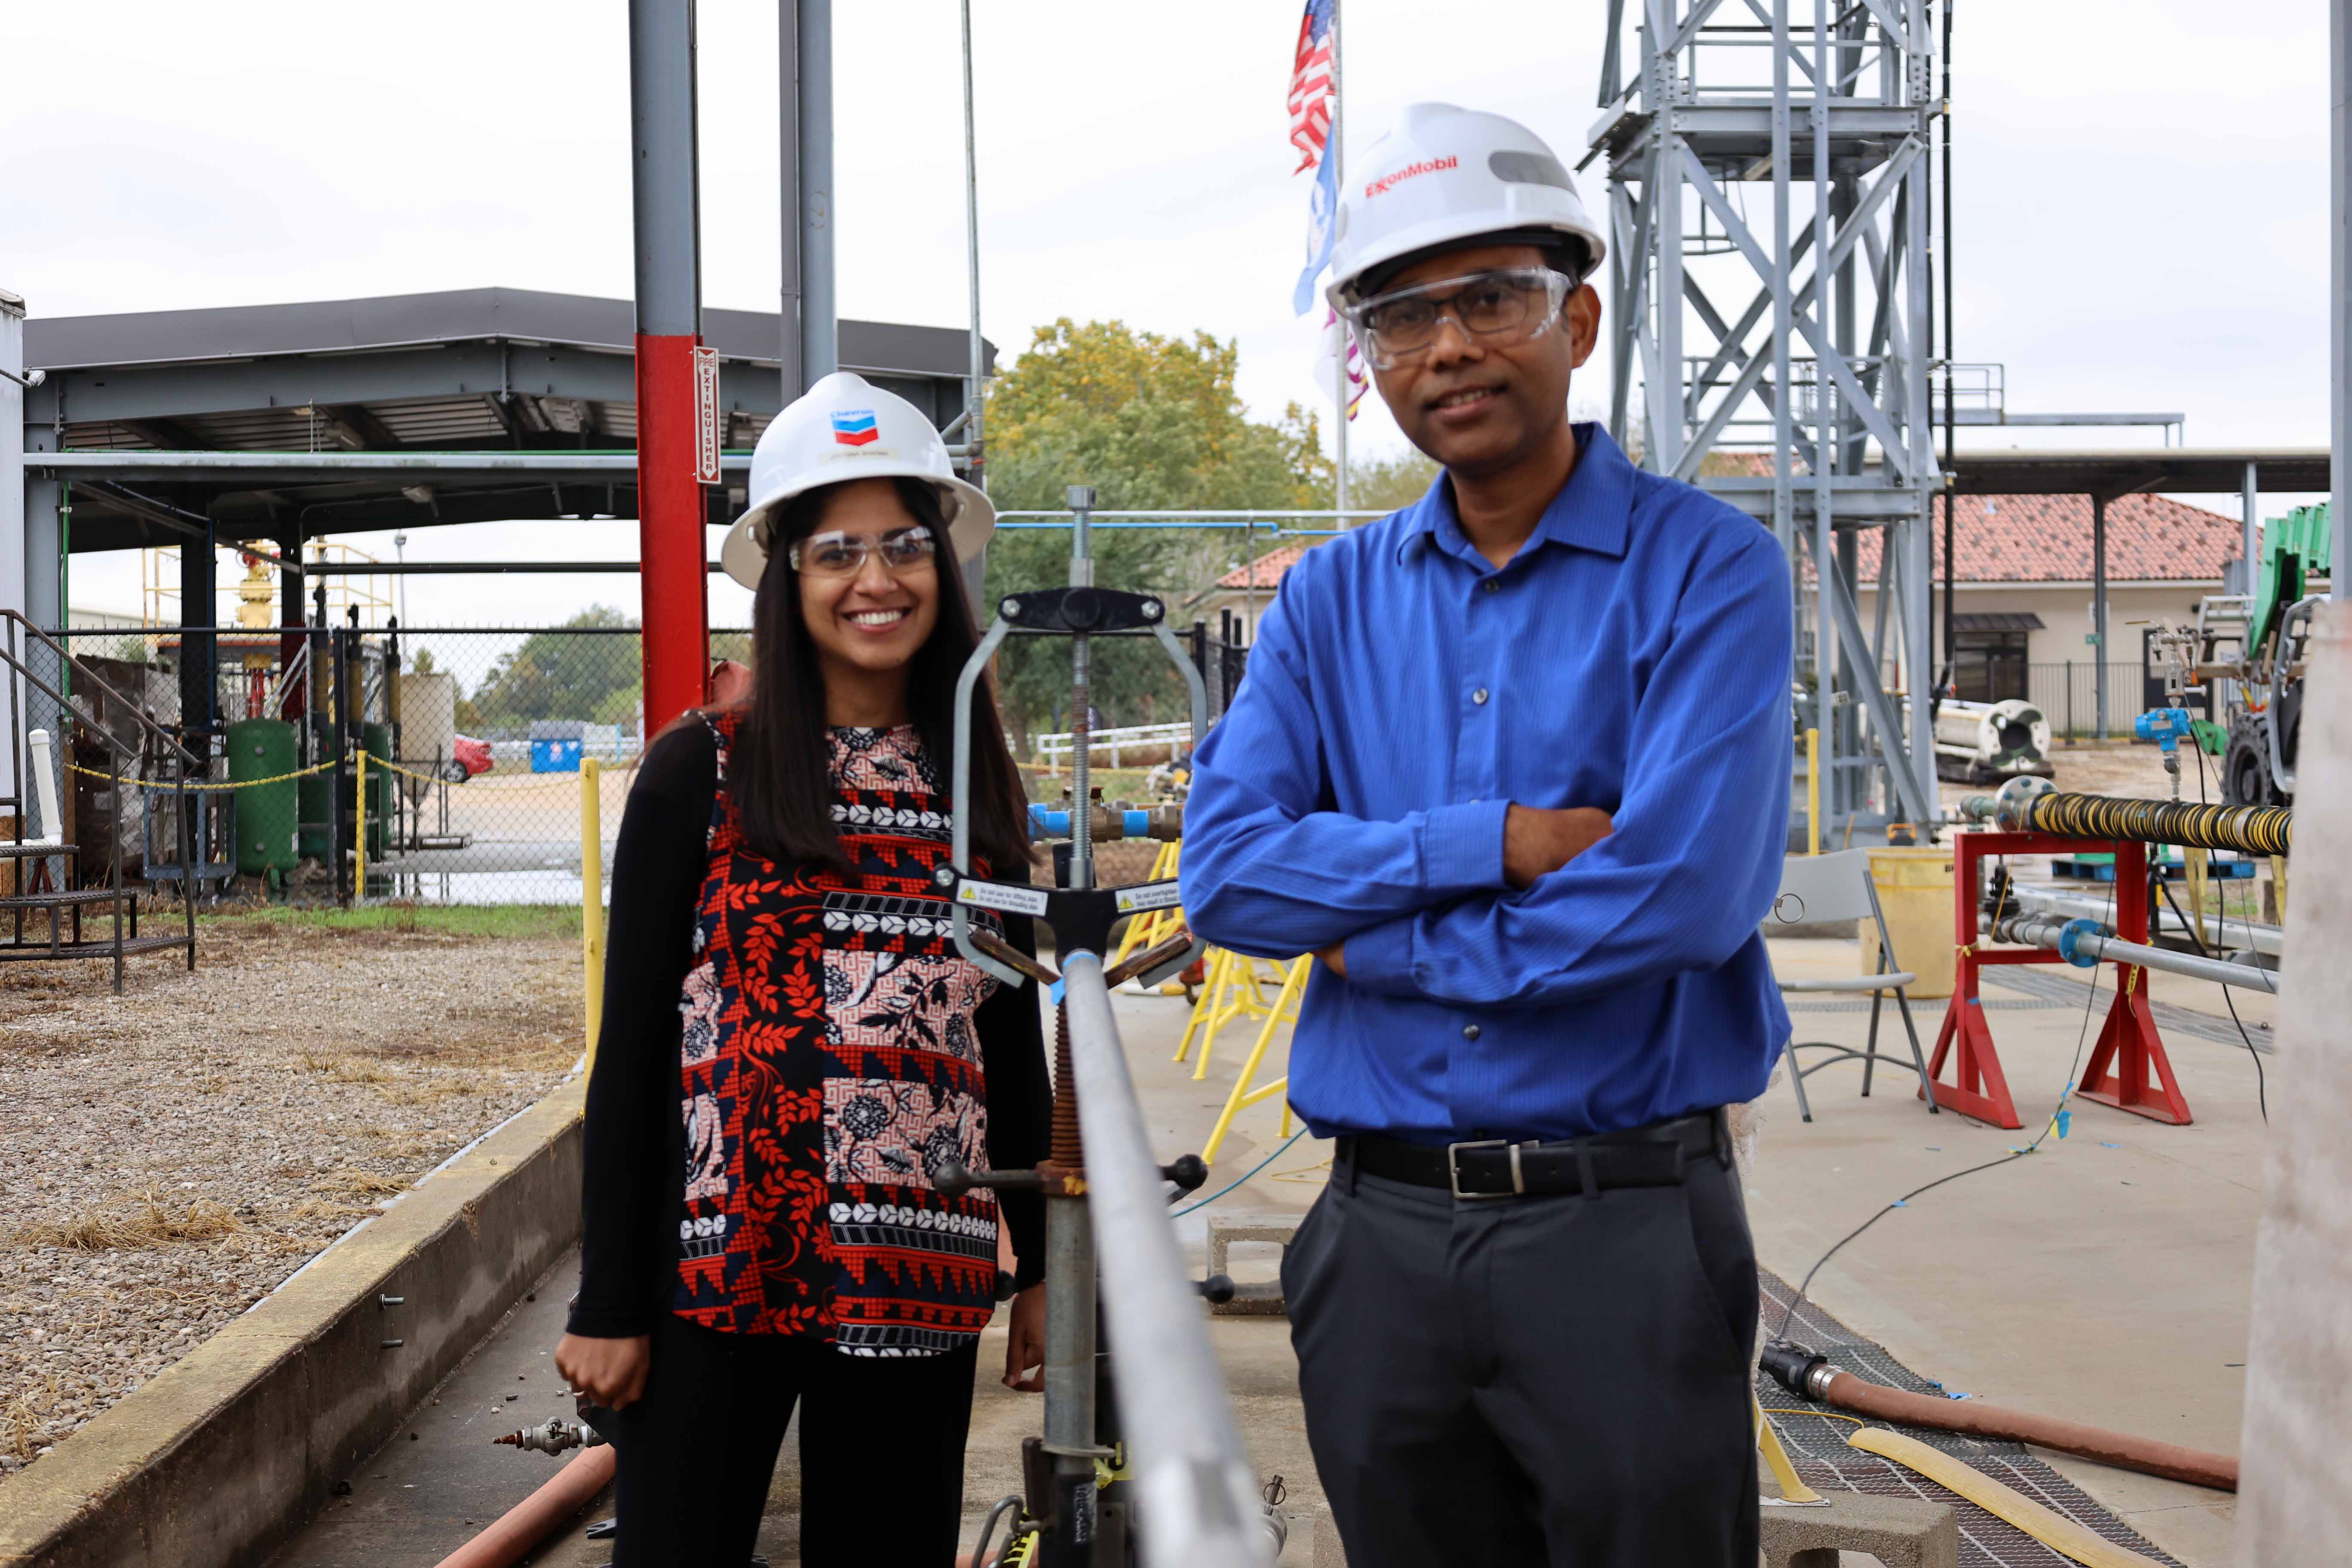 LSU Engineering faculty wearing hard hats in front of oil and gas facility.